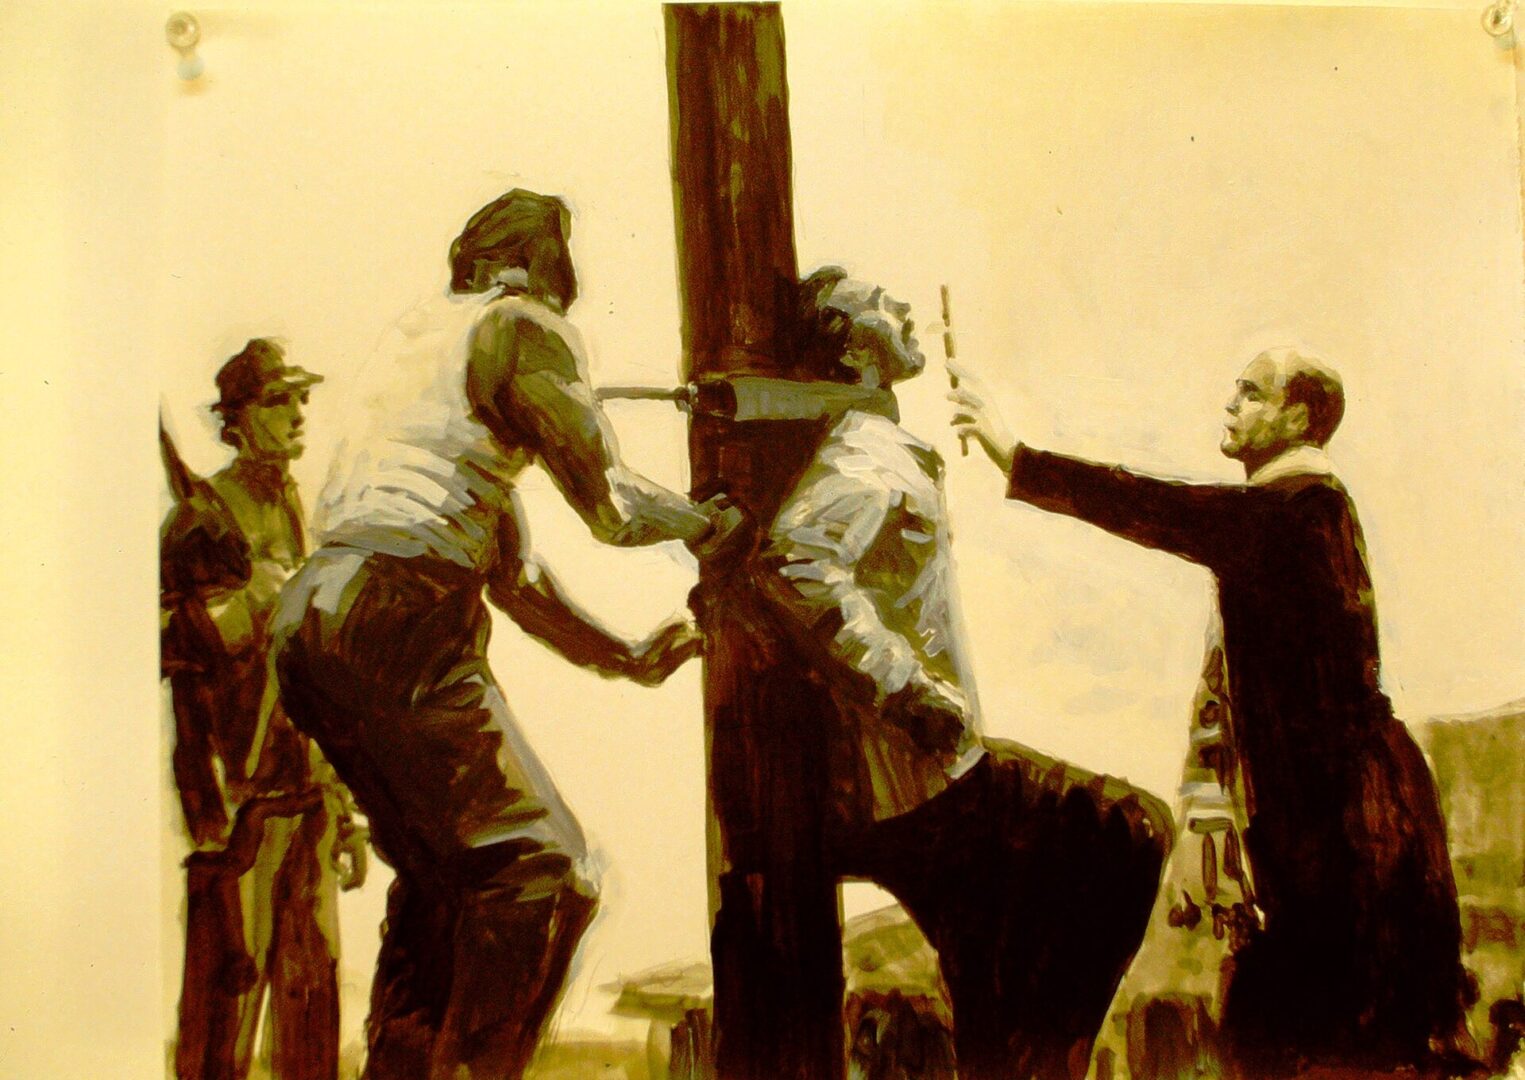 THE EXECUTION<br>
1991<br>
11" x 14"
